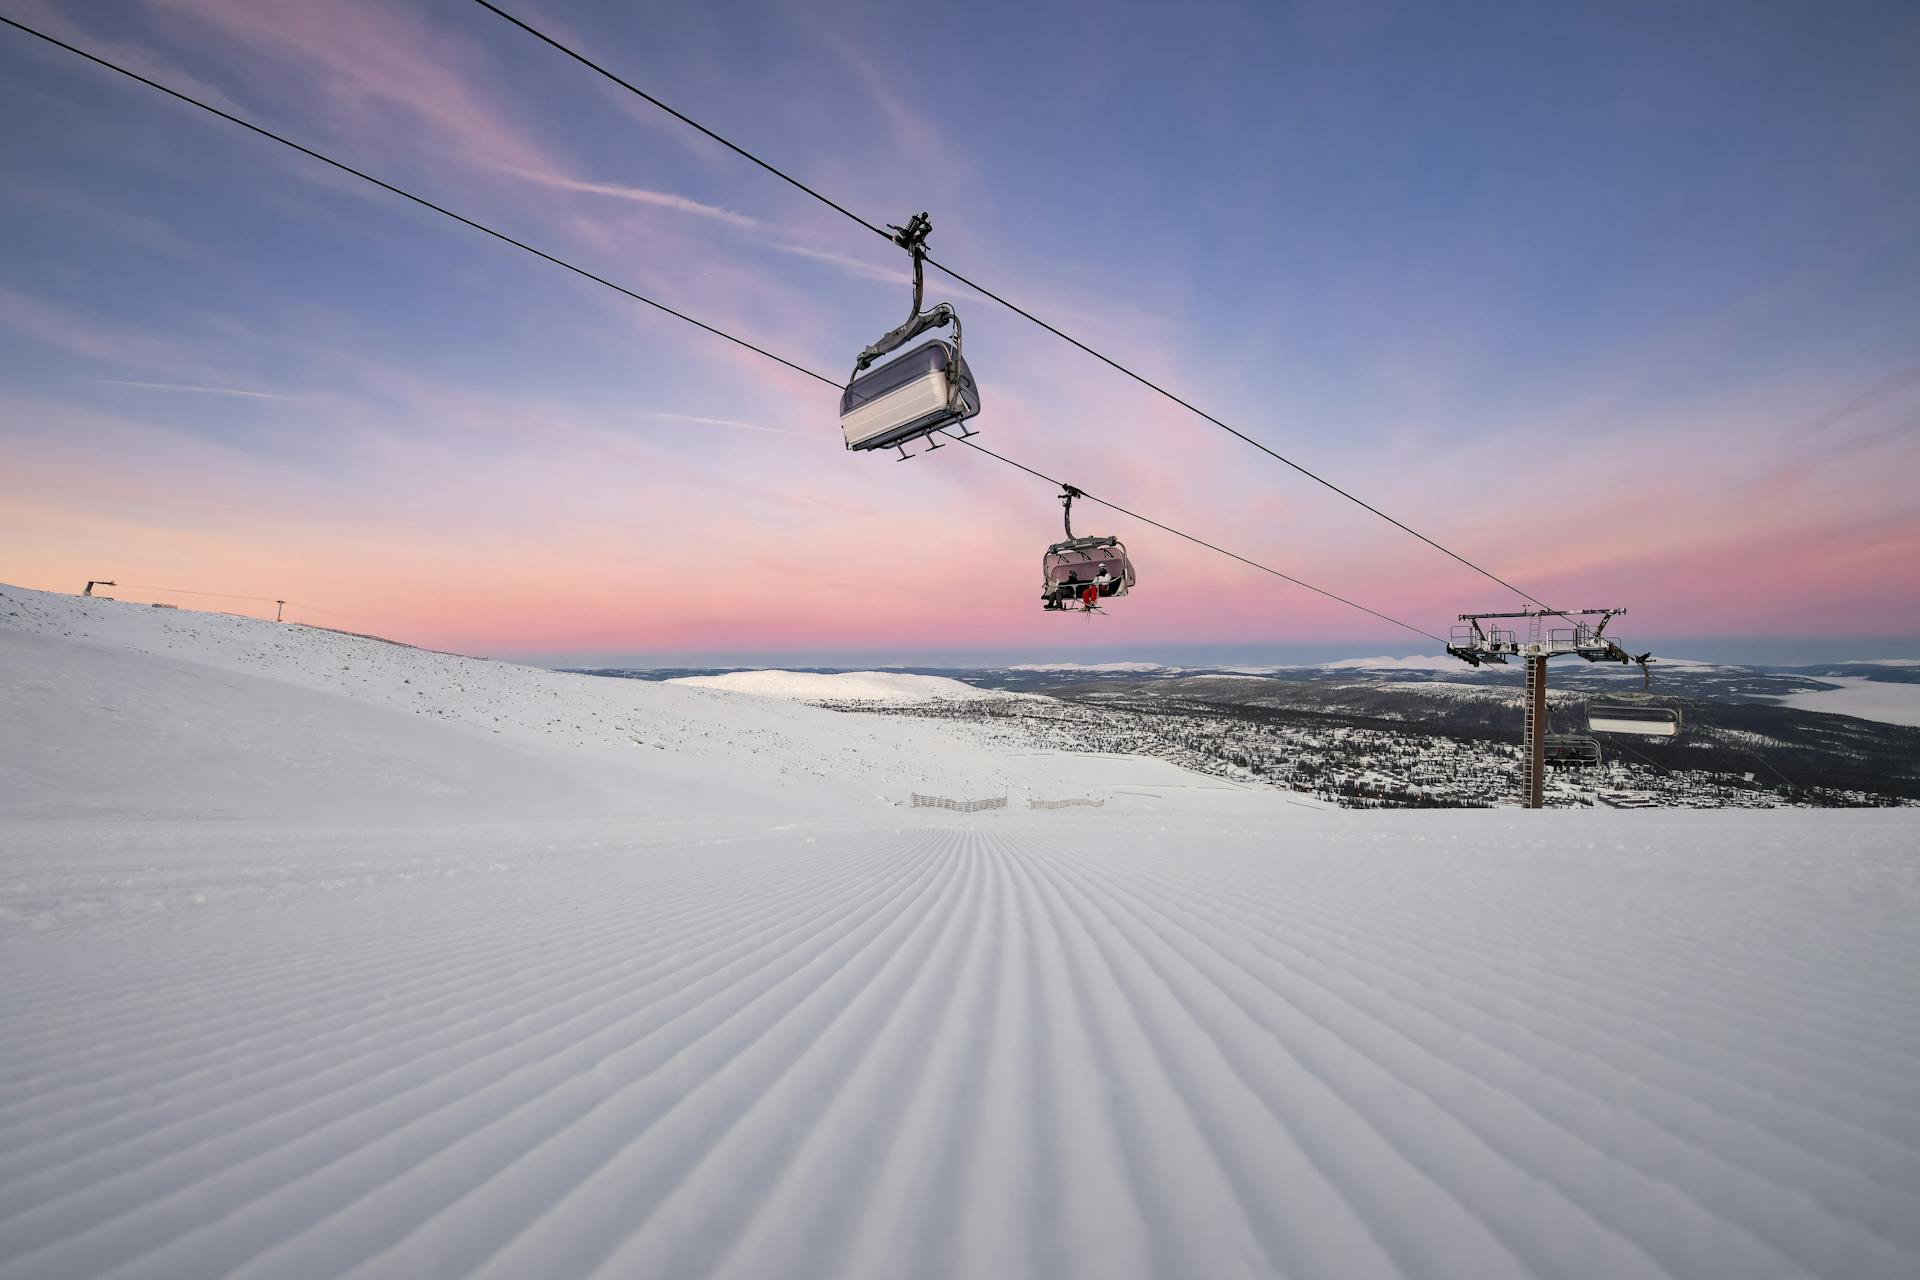 Skiiers being transported to top of mountain on chairlift at sunrise